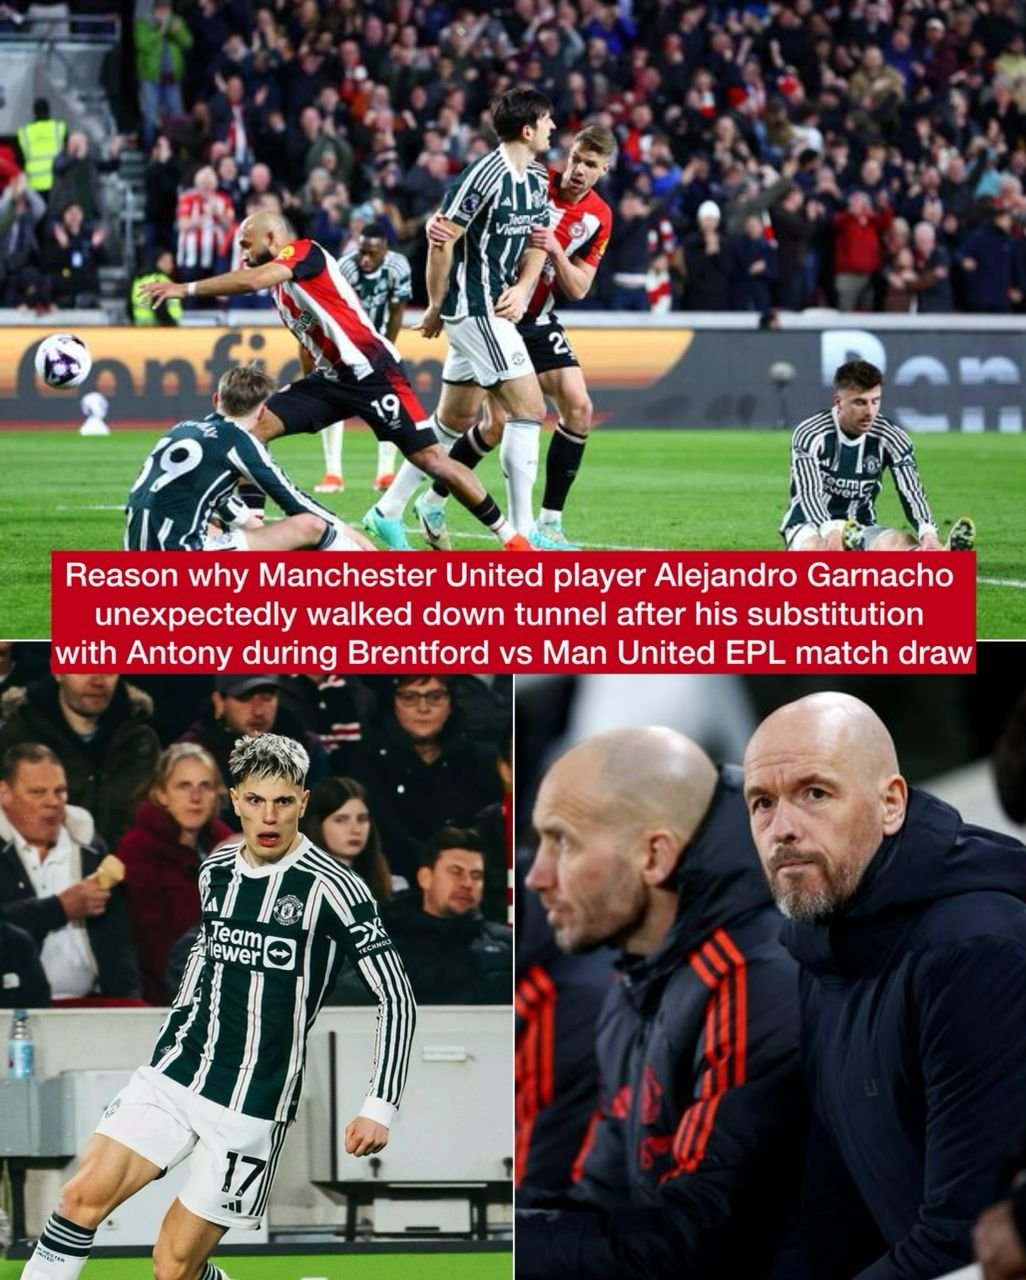 Reason why the 19-year-old Manchester United player Alejandro Garnacho unexpectedly walked down tunnel after his substitution with Antony during Brentford vs Man United EPL match draw